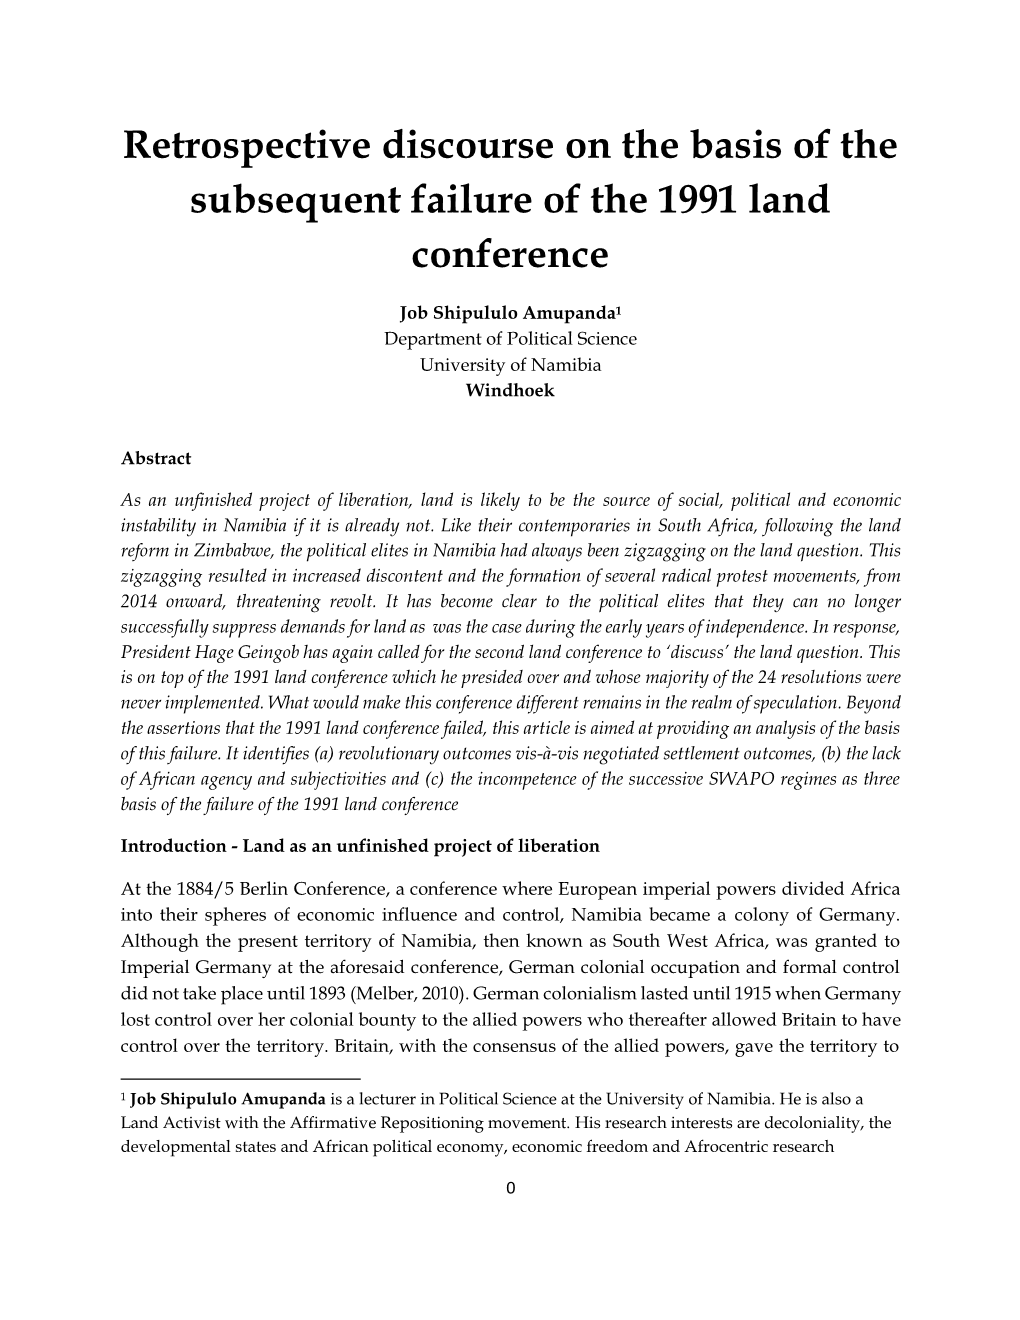 Retrospective Discourse on the Basis of the Subsequent Failure of the 1991 Land Conference